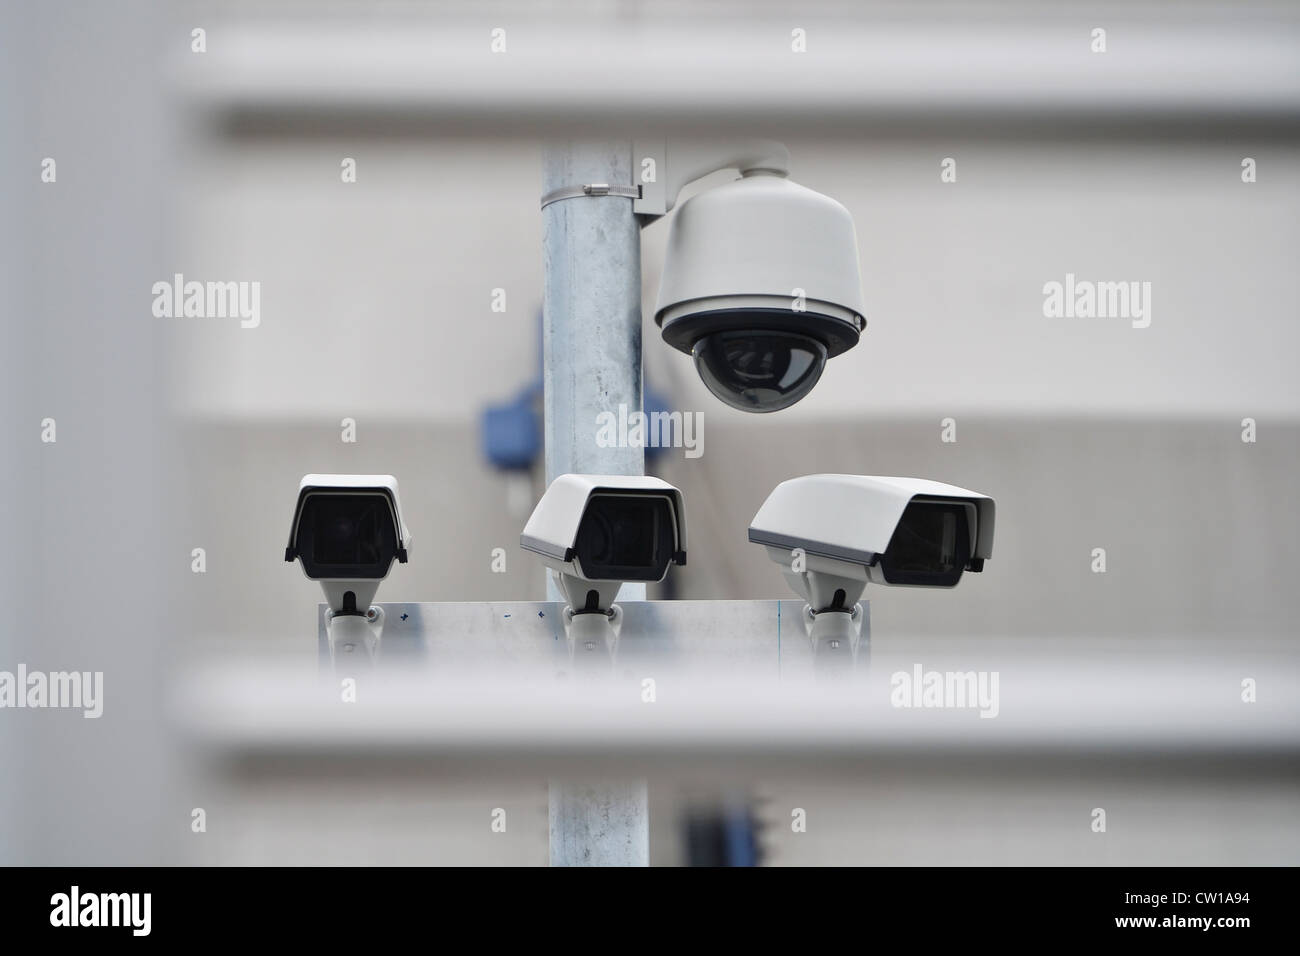 High tech overhead security camera system installed in guarded industrial  area Stock Photo - Alamy